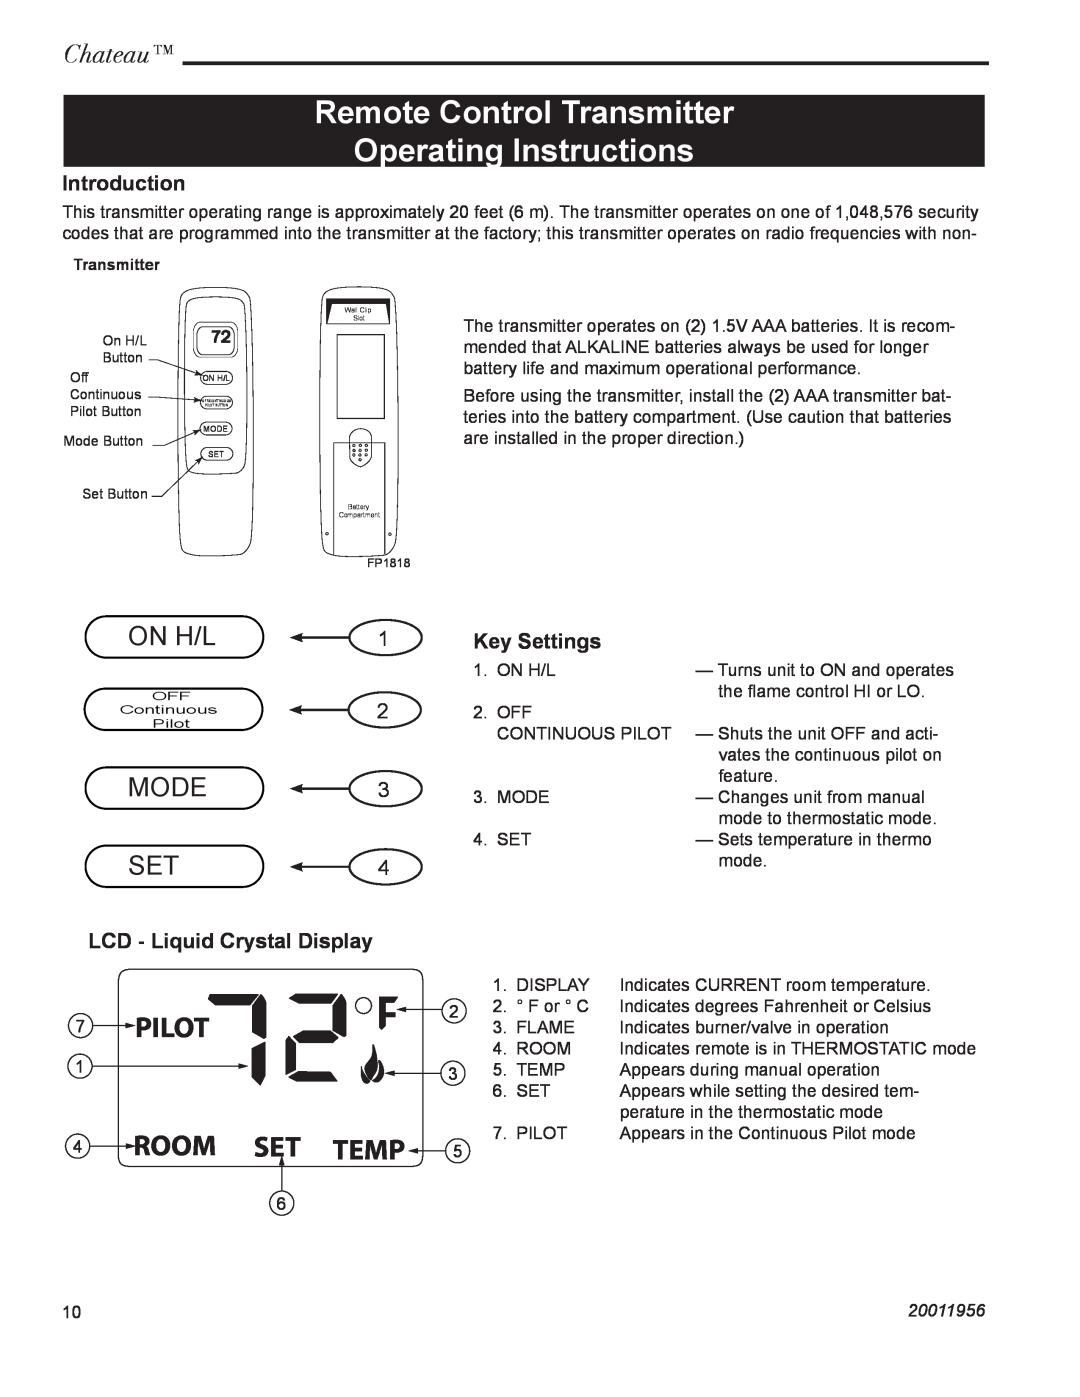 CFM Corporation DVT44IN, DVT38IN Remote Control Transmitter Operating Instructions, On H/L, Mode, Chateau, 20011956 